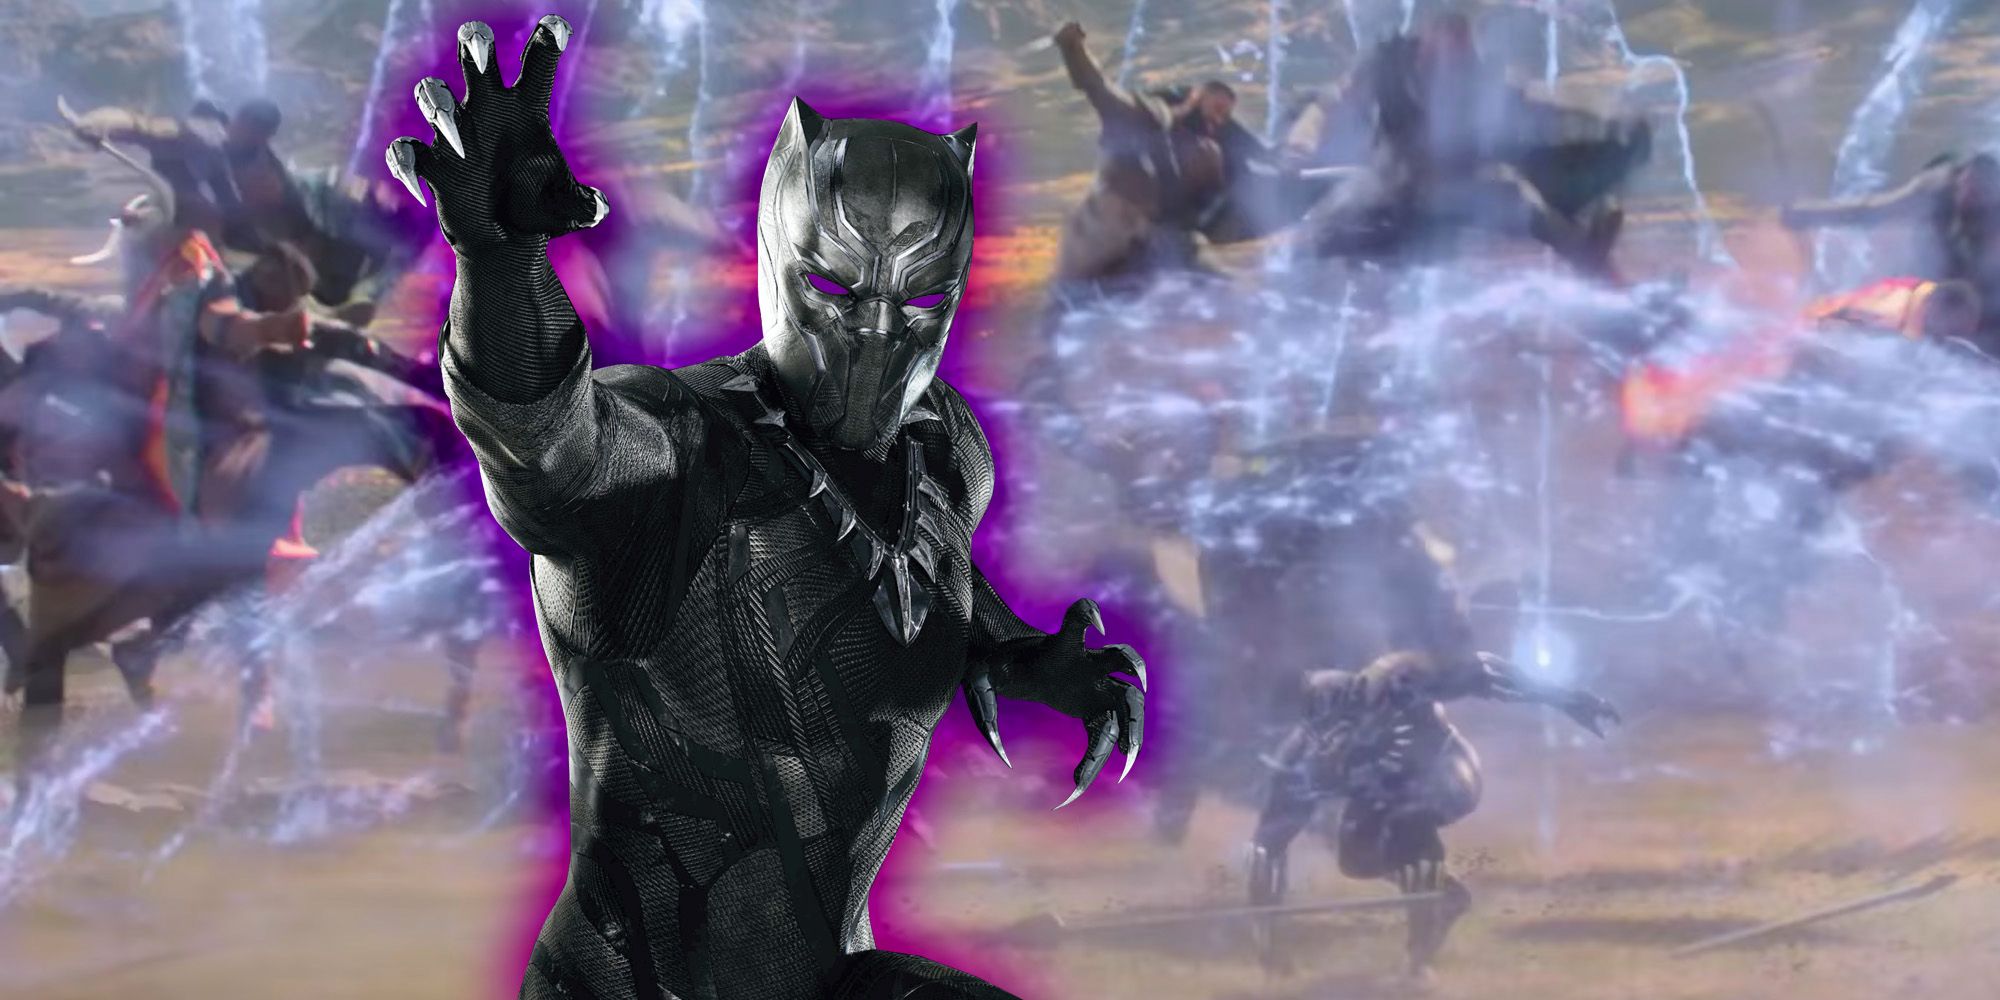 Black Panther's purple suit from the movies.